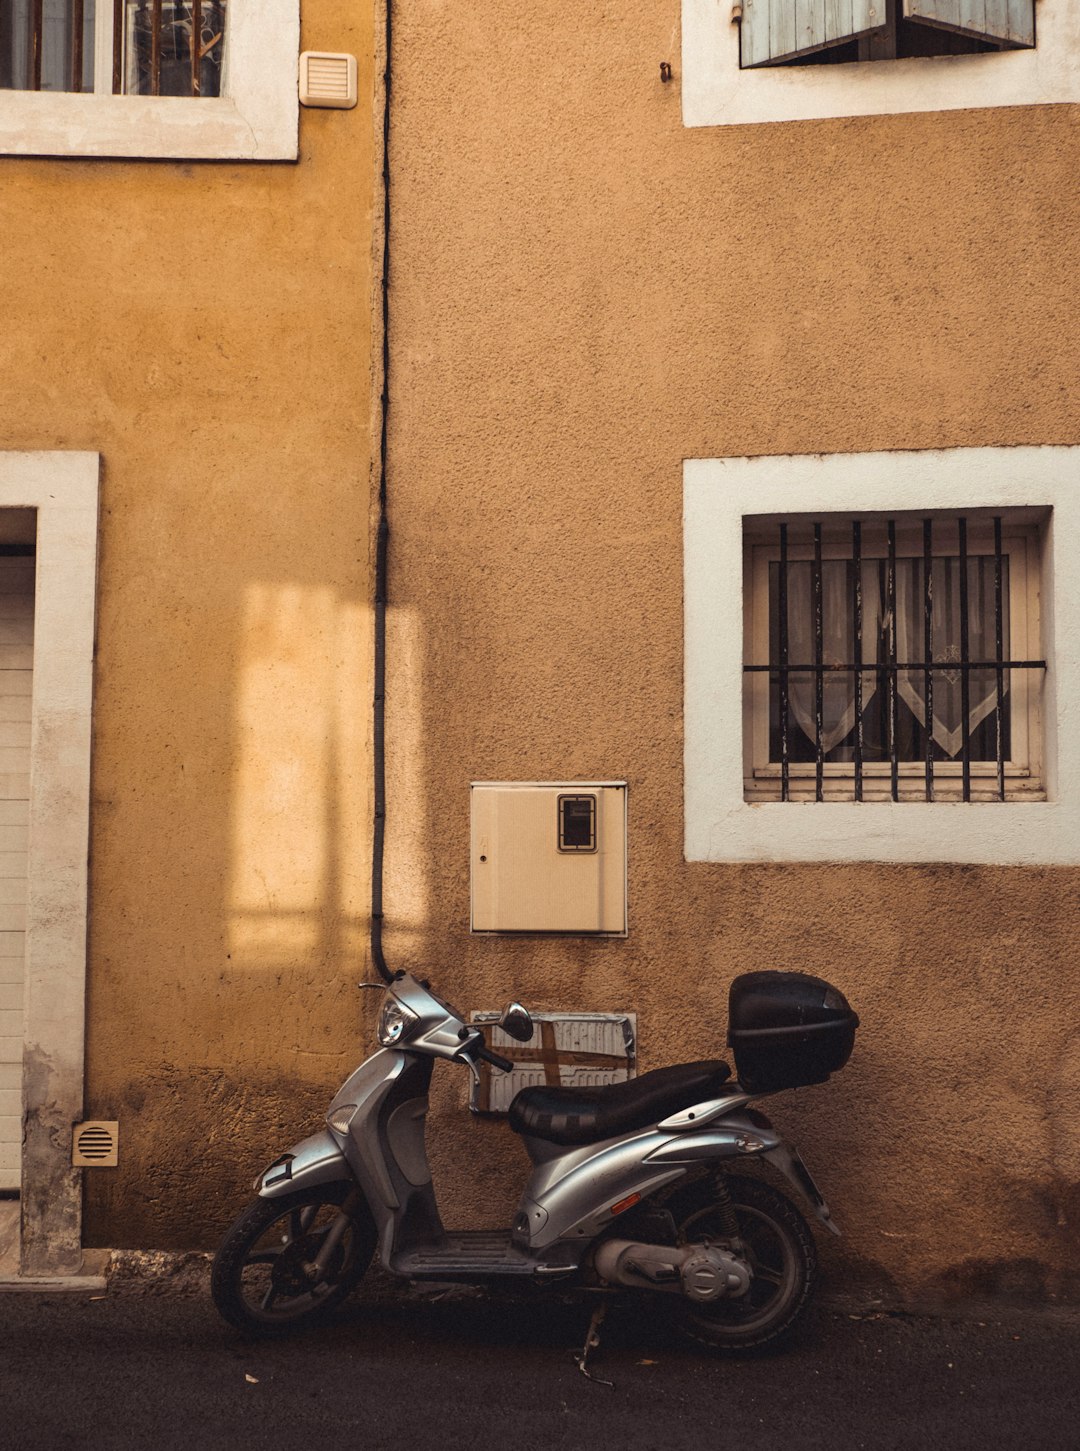 black motorcycle parked beside brown concrete building